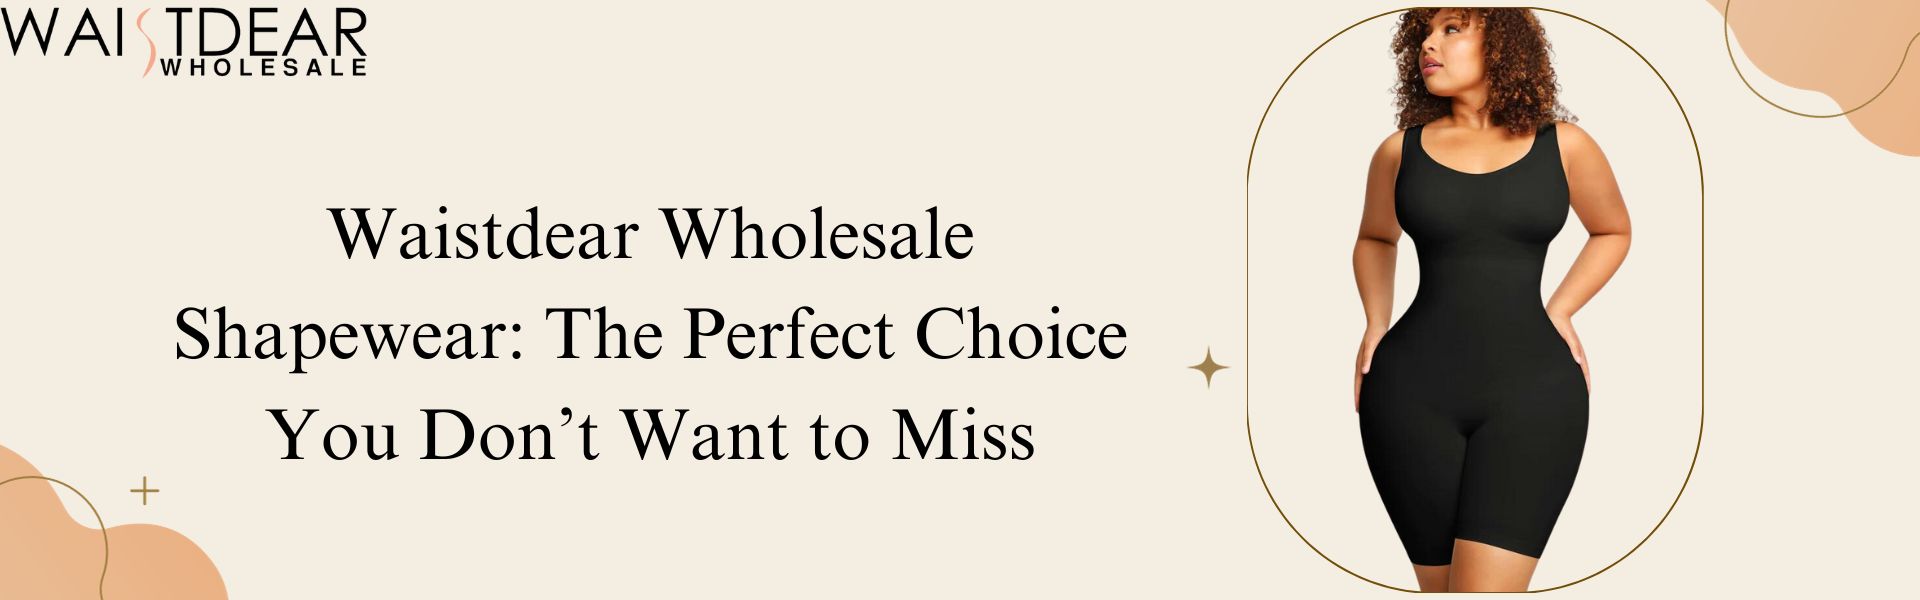 Waistdear Wholesale Shapewear: The Perfect Choice You Don’t Want to Miss